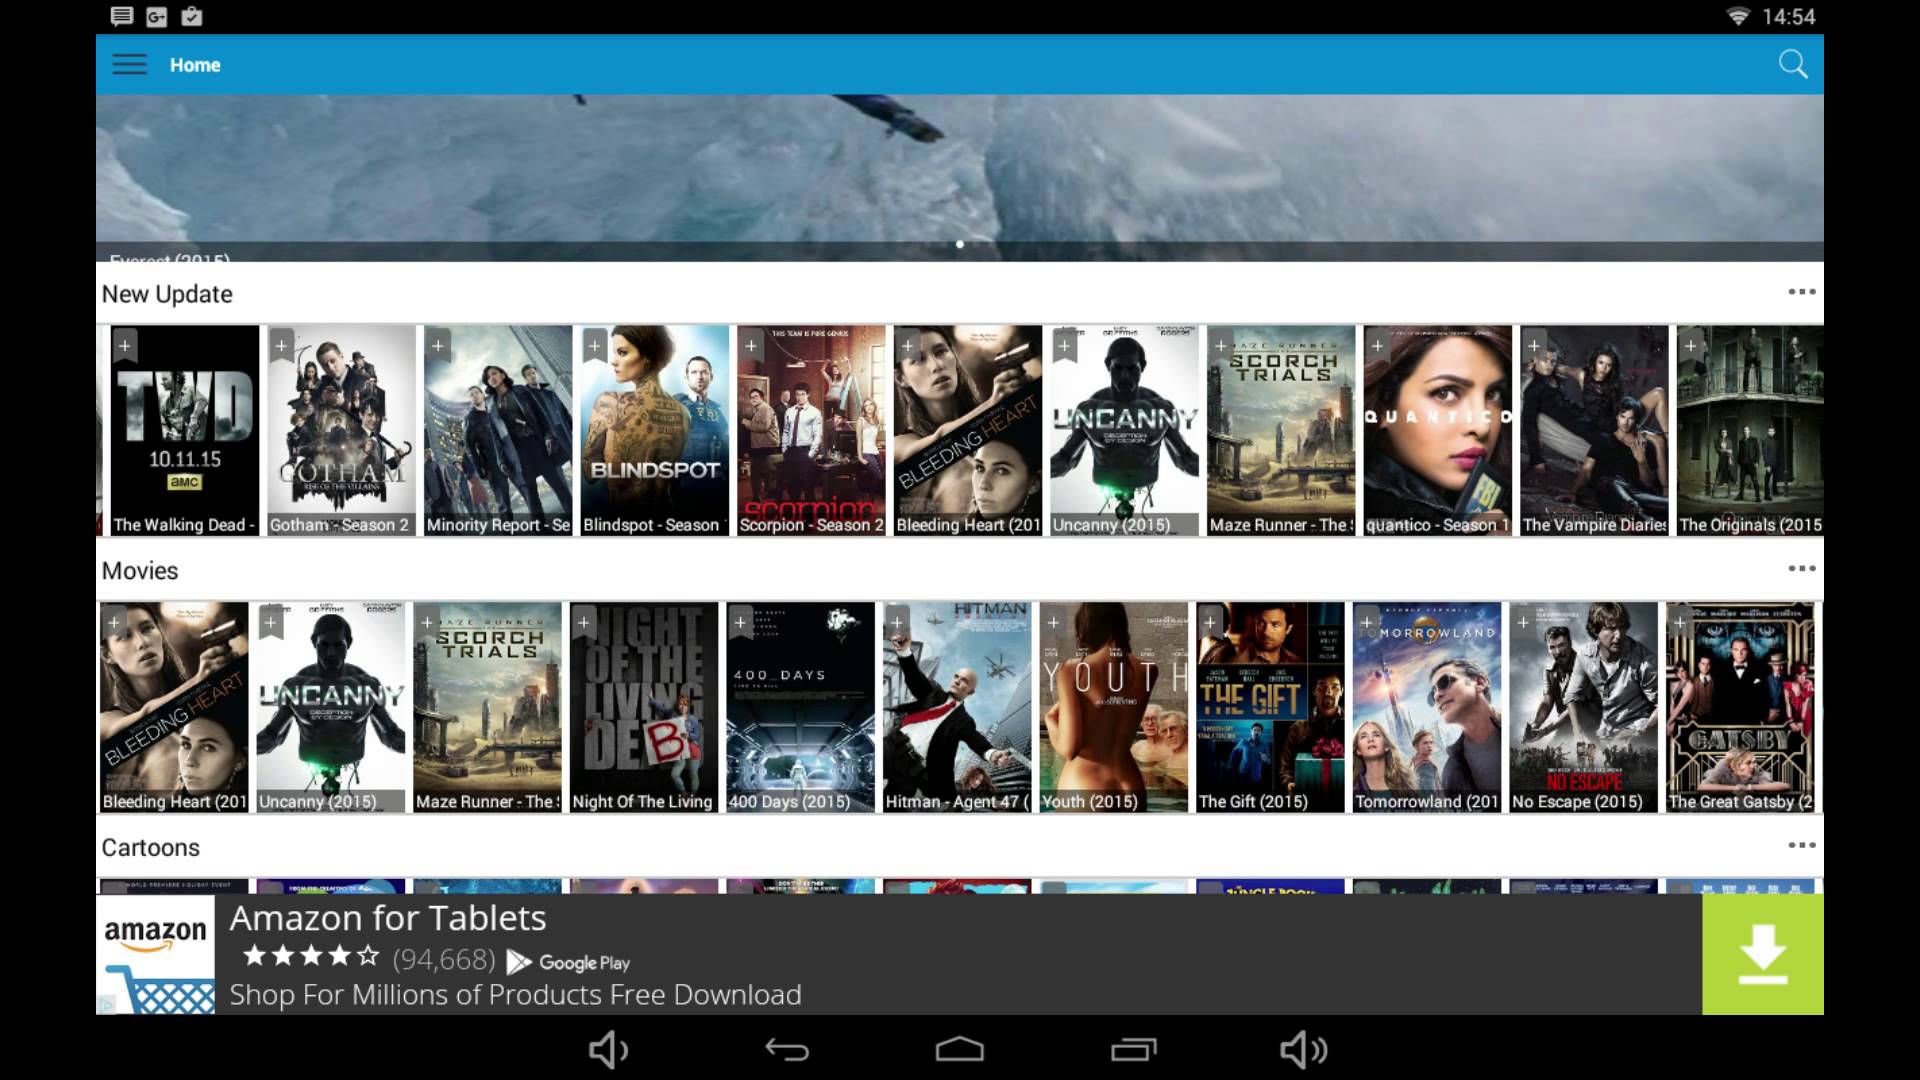 ANDROID TV SHOWS MOVIES APK FILE